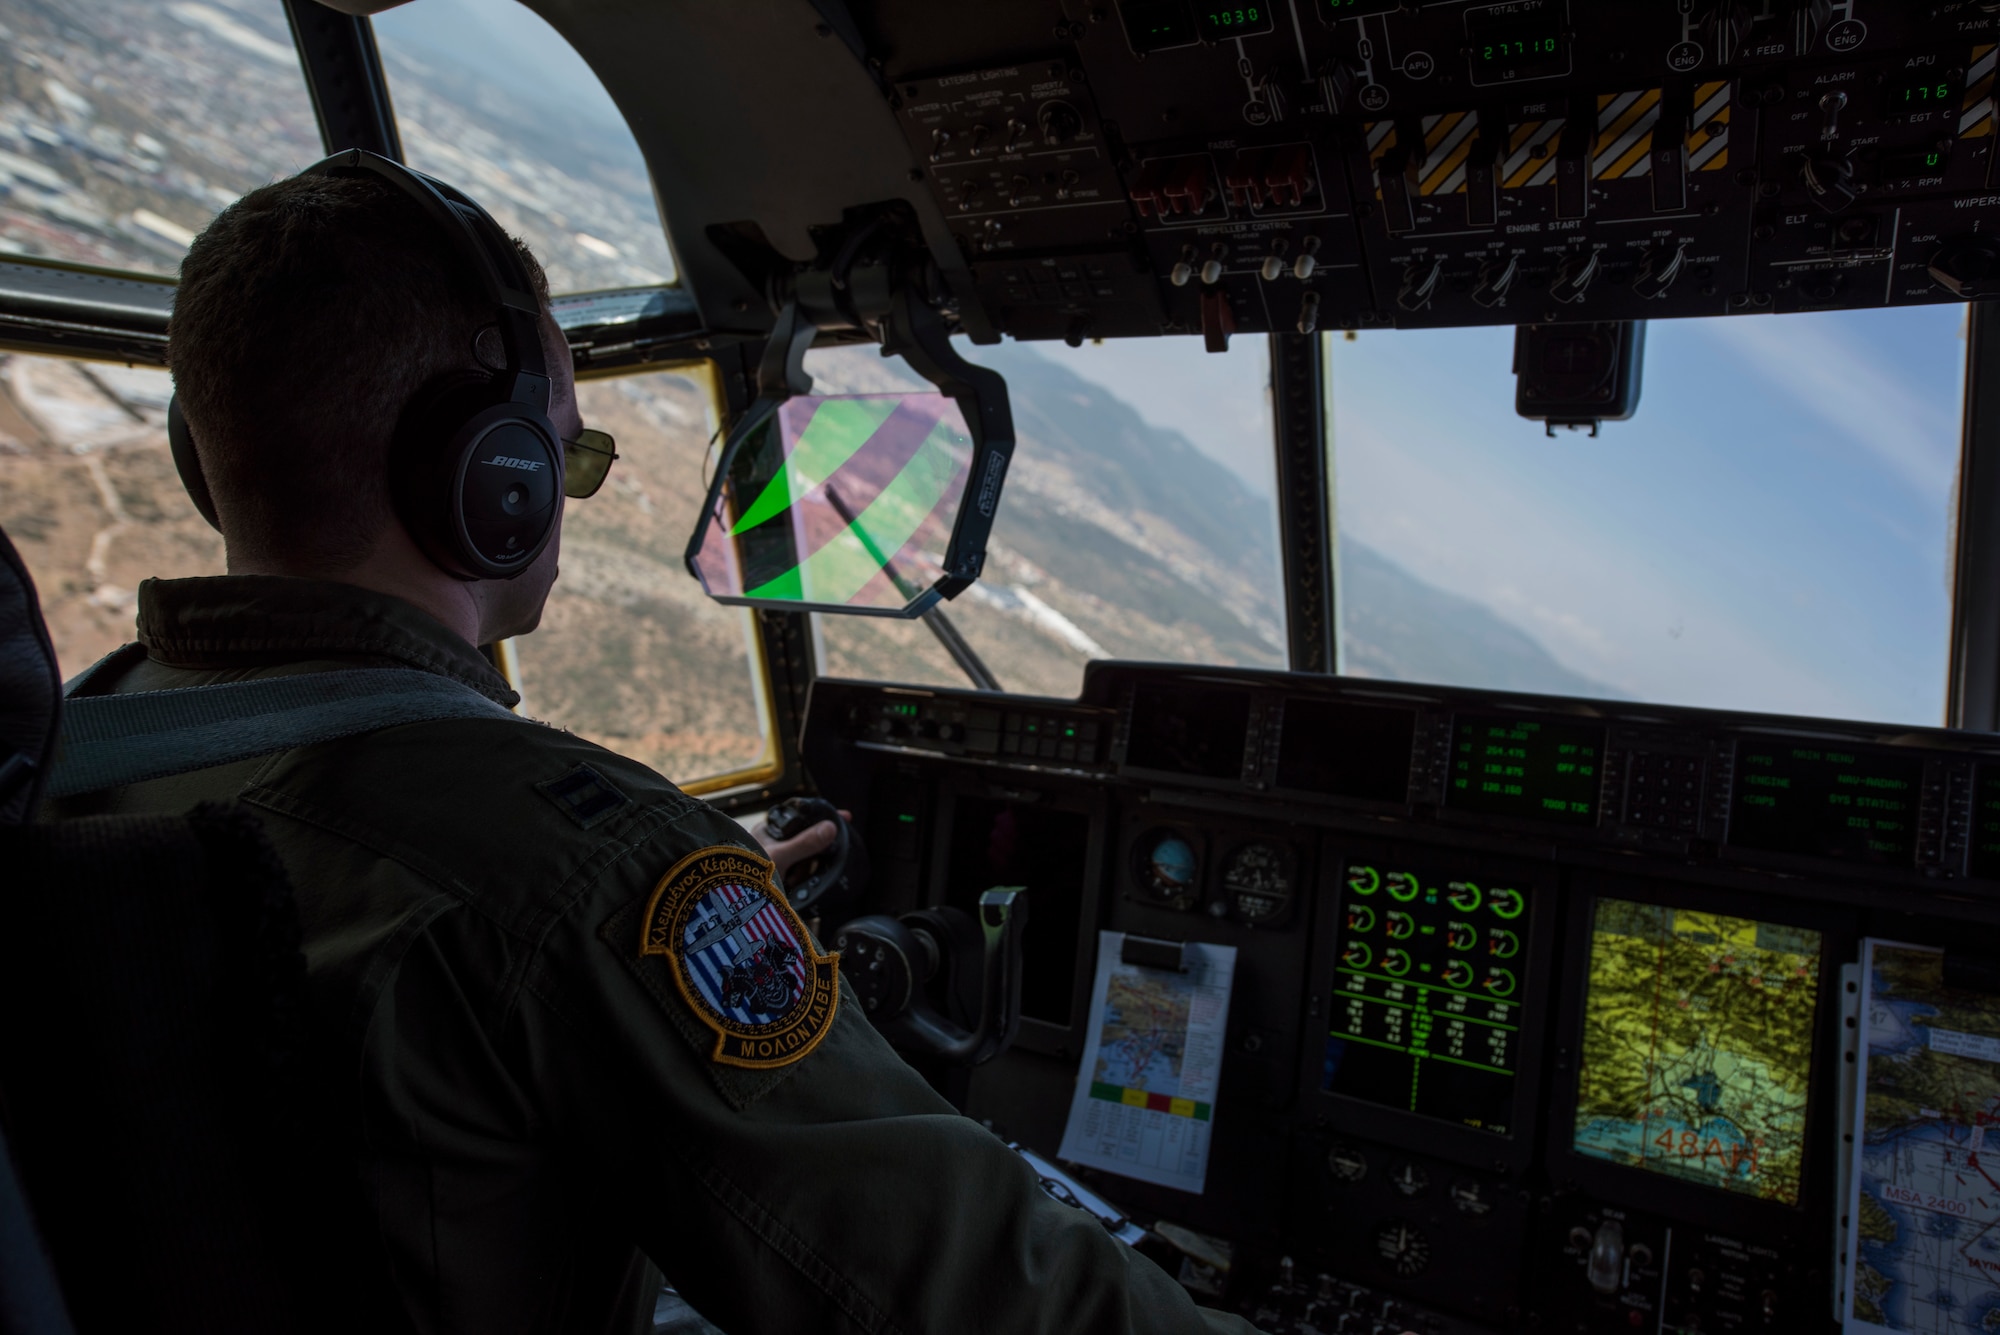 U.S. Air Force Capt. Tim Vedra, 37th Airlift Squadron C-130J Super Hercules pilot takes off from Elefsis Air Base, Greece, during exercise Stolen Cerberus V, May 9, 2018. The mission included Hellenic air force paratroopers conducting a water insertion jump. Combined exercises such as these enhance the interoperability capabilities and skills among allied and partner armed forces. (U.S. Air Force photo by Senior Airman Devin M. Rumbaugh)